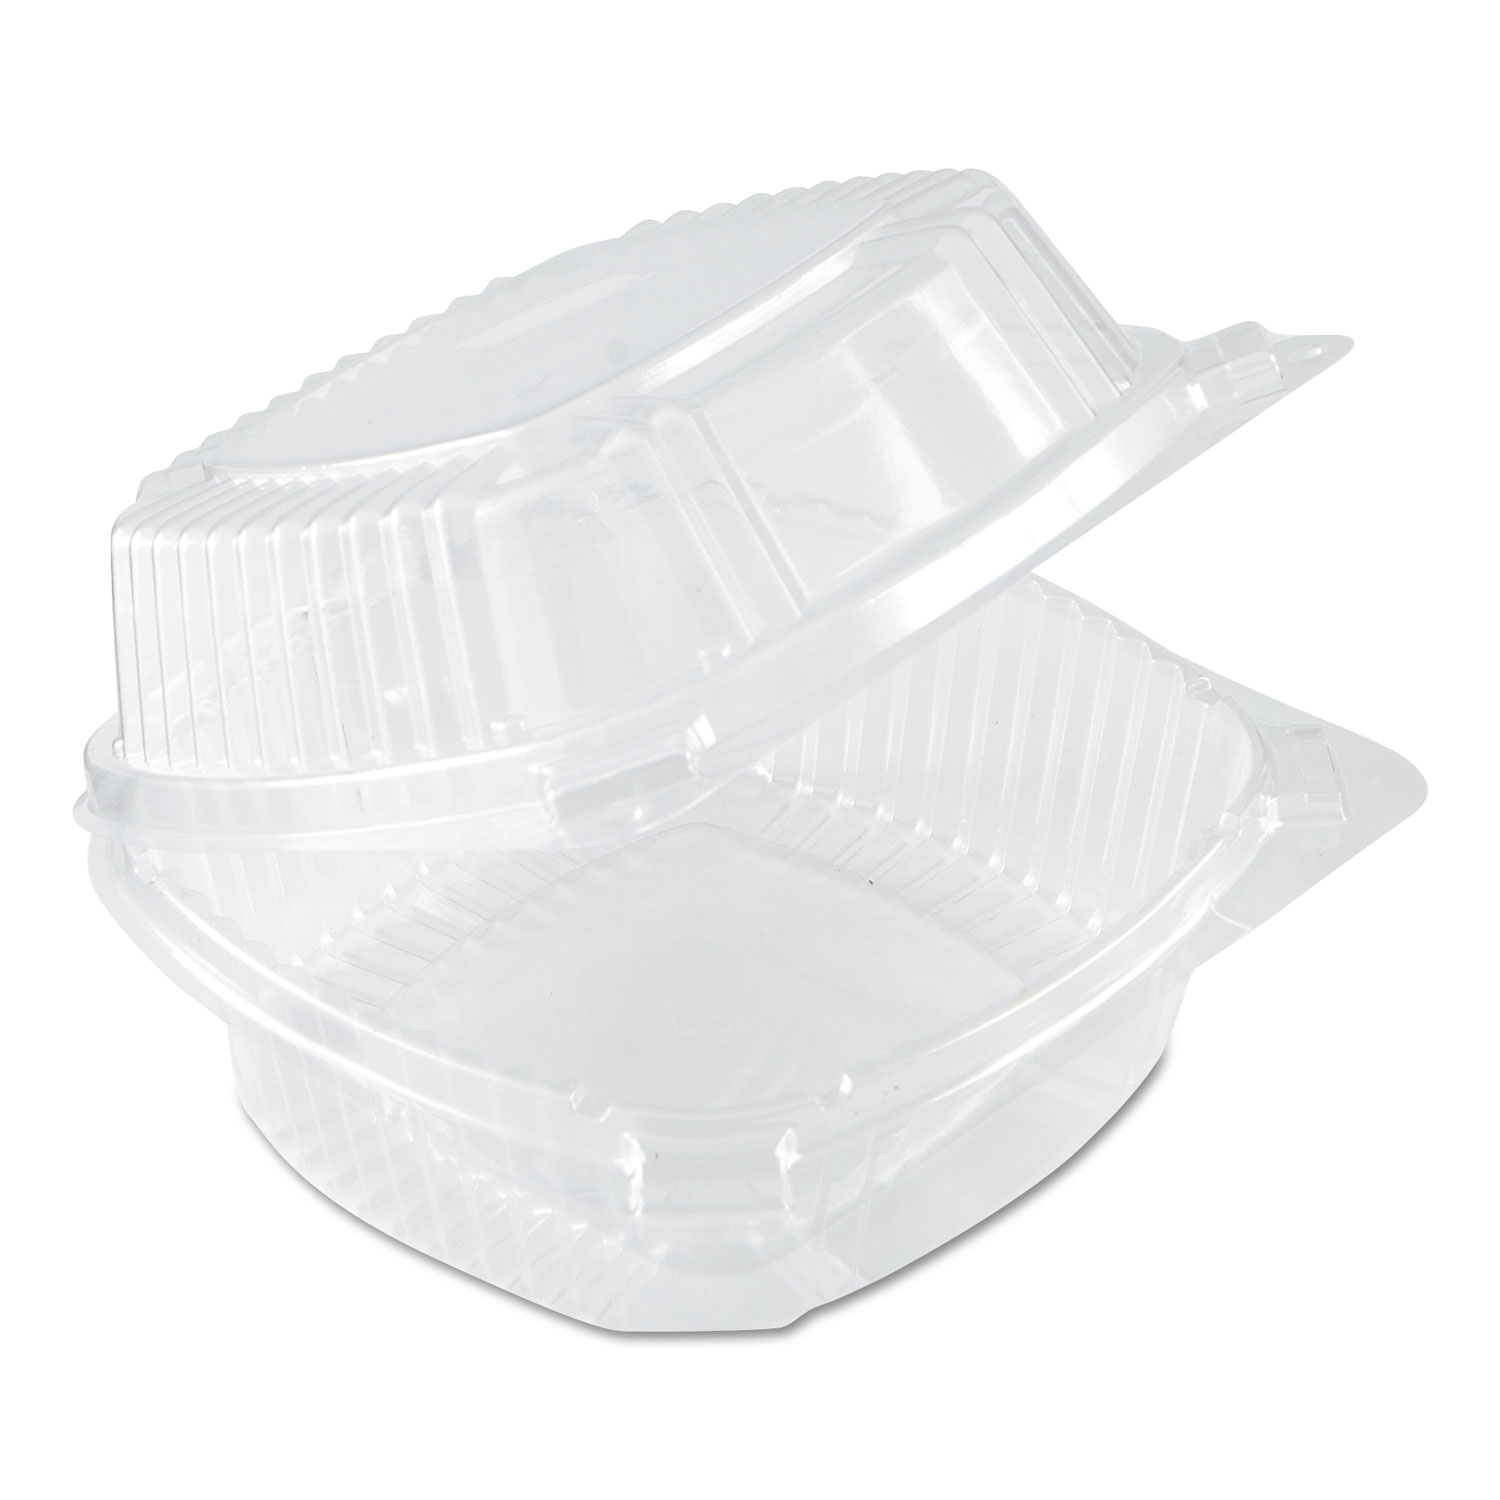  Pactiv YCI811600000 SmartLock Food Containers, Clear, 20oz, 5 3/4w x 6d x 3h, 500/Carton (PCTYCI81160) 